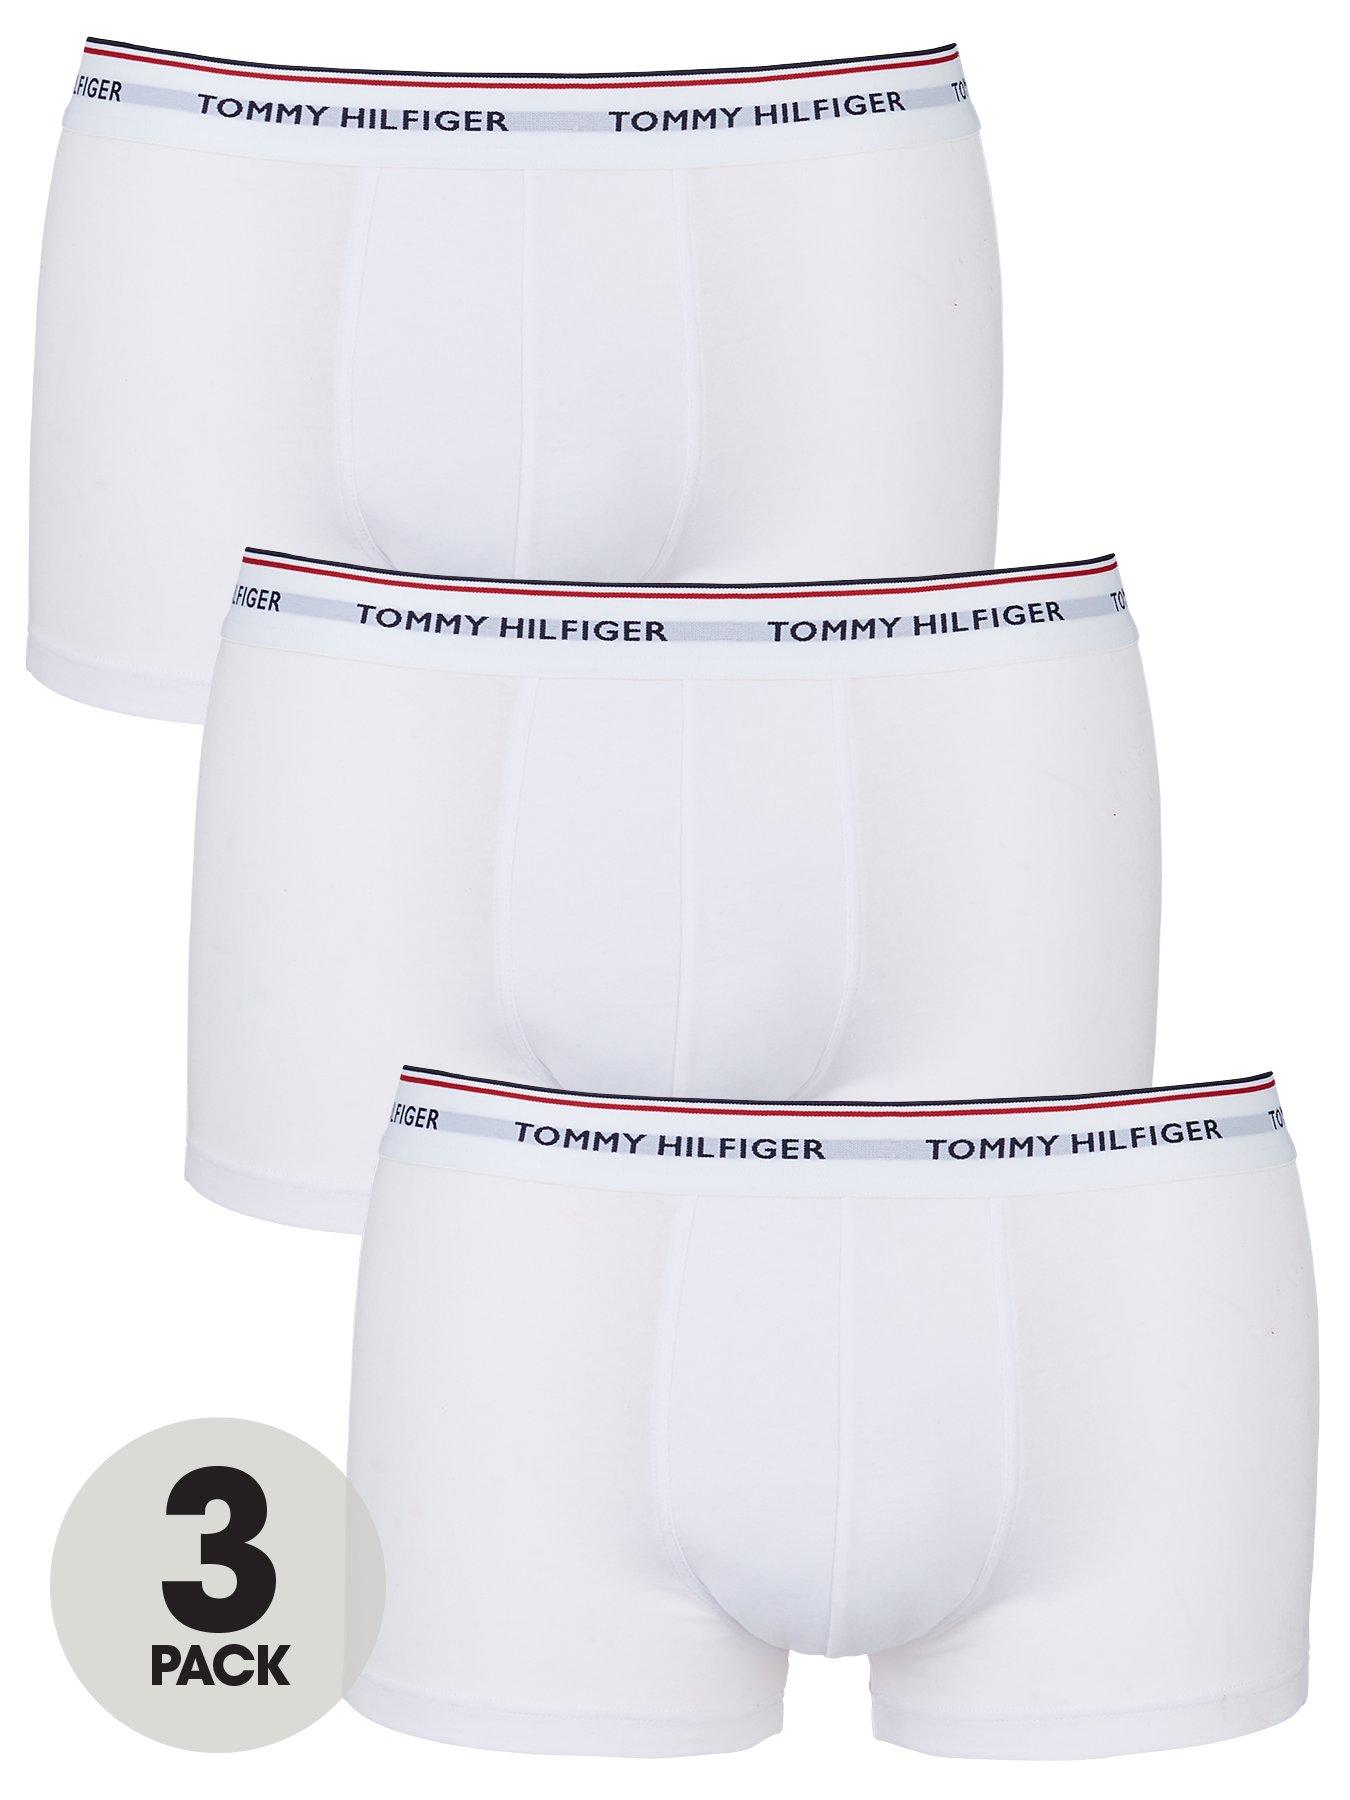 Tommy Hilfiger Underwear Review: Boxers, Briefs, Trunks & More — Pants &  Socks